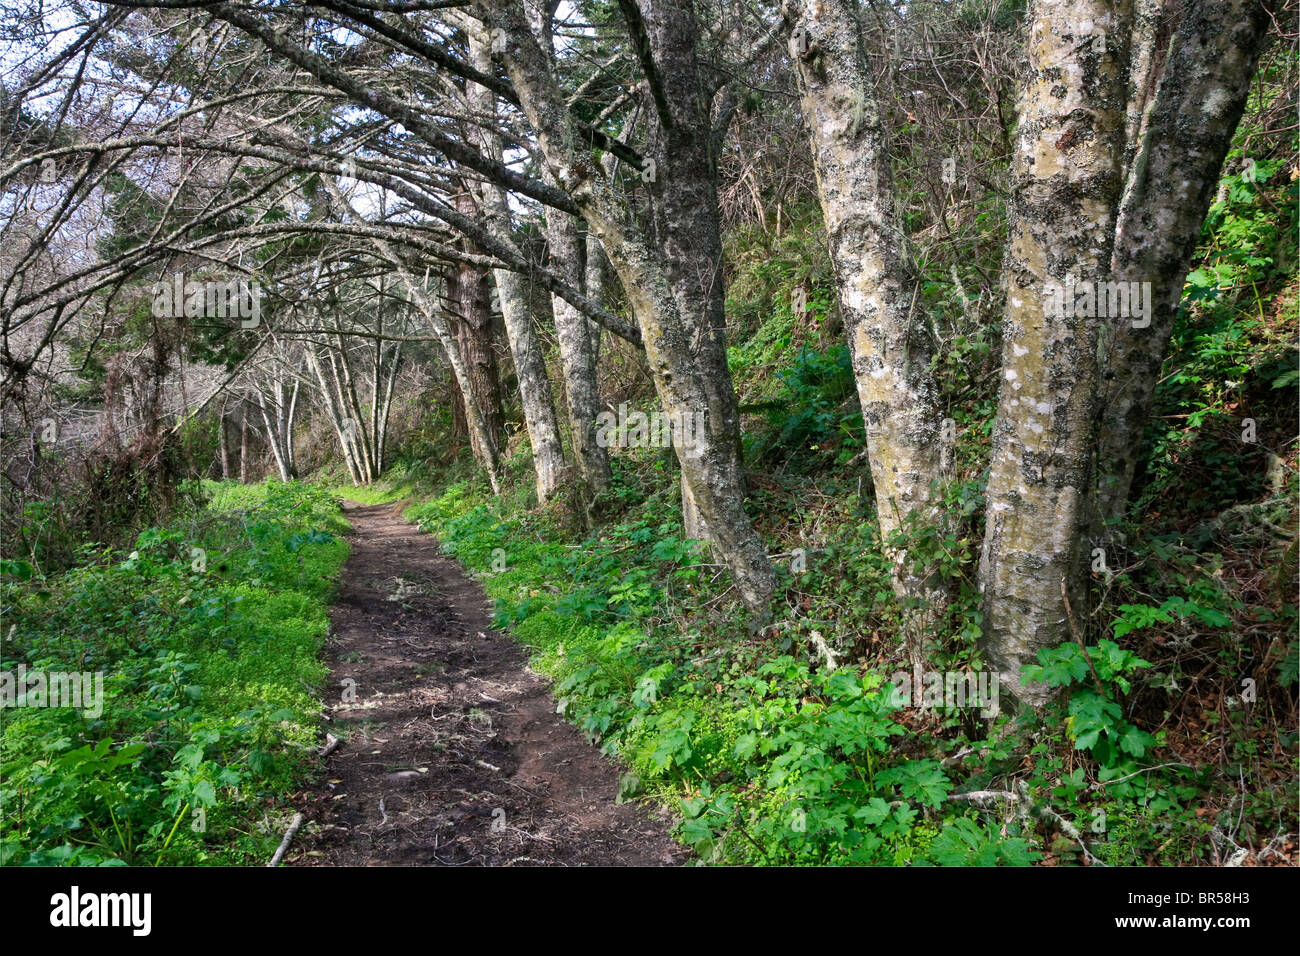 The COAST TRAIL winds through a temperate forest - POINT REYES NATIONAL SEASHORE, CALIFORNIA Stock Photo